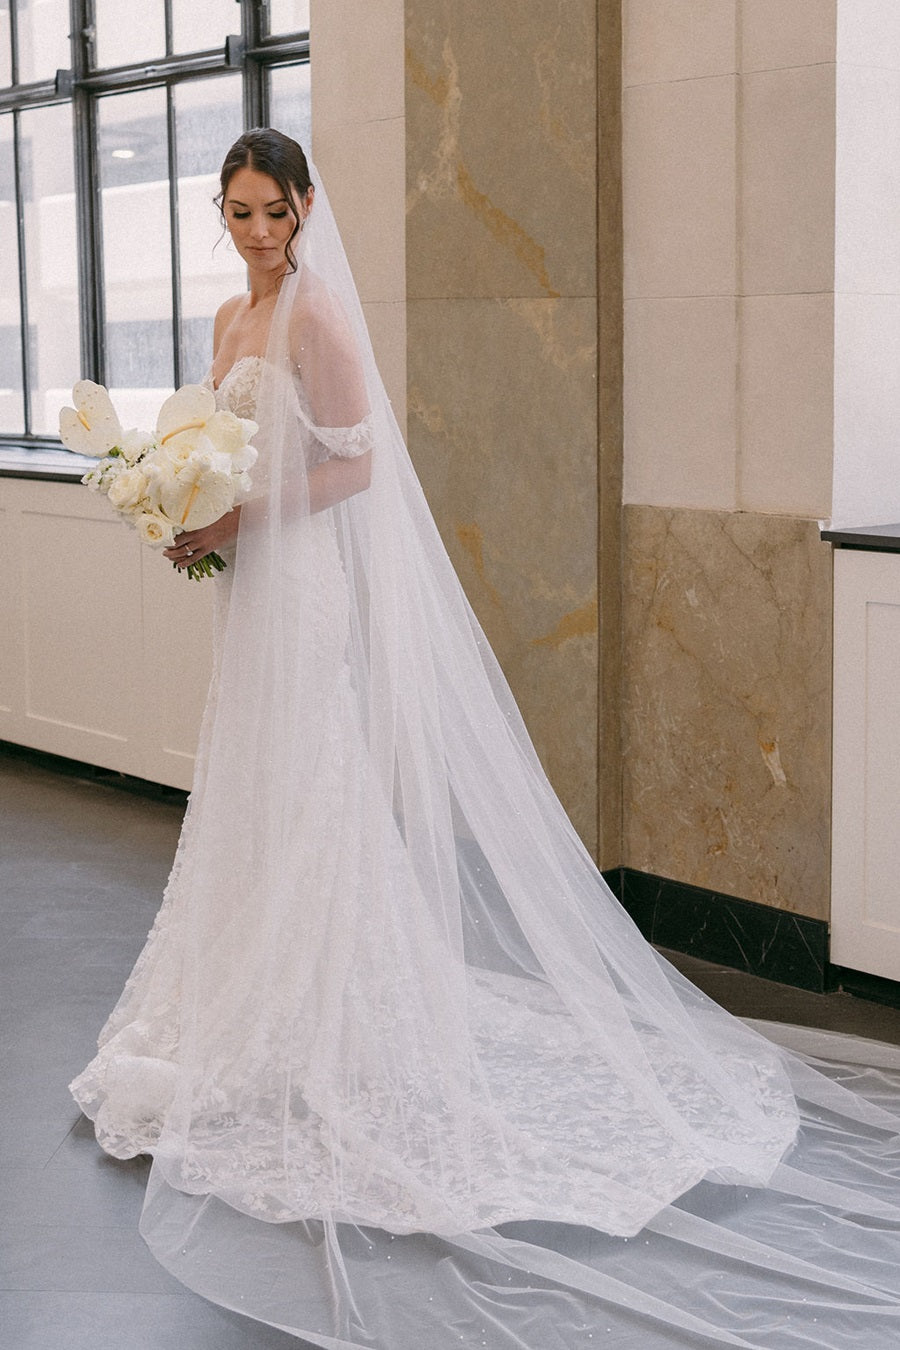 Bride stands alone, looking down to her side. She holds a bridal bouquet full of roses and calathea.